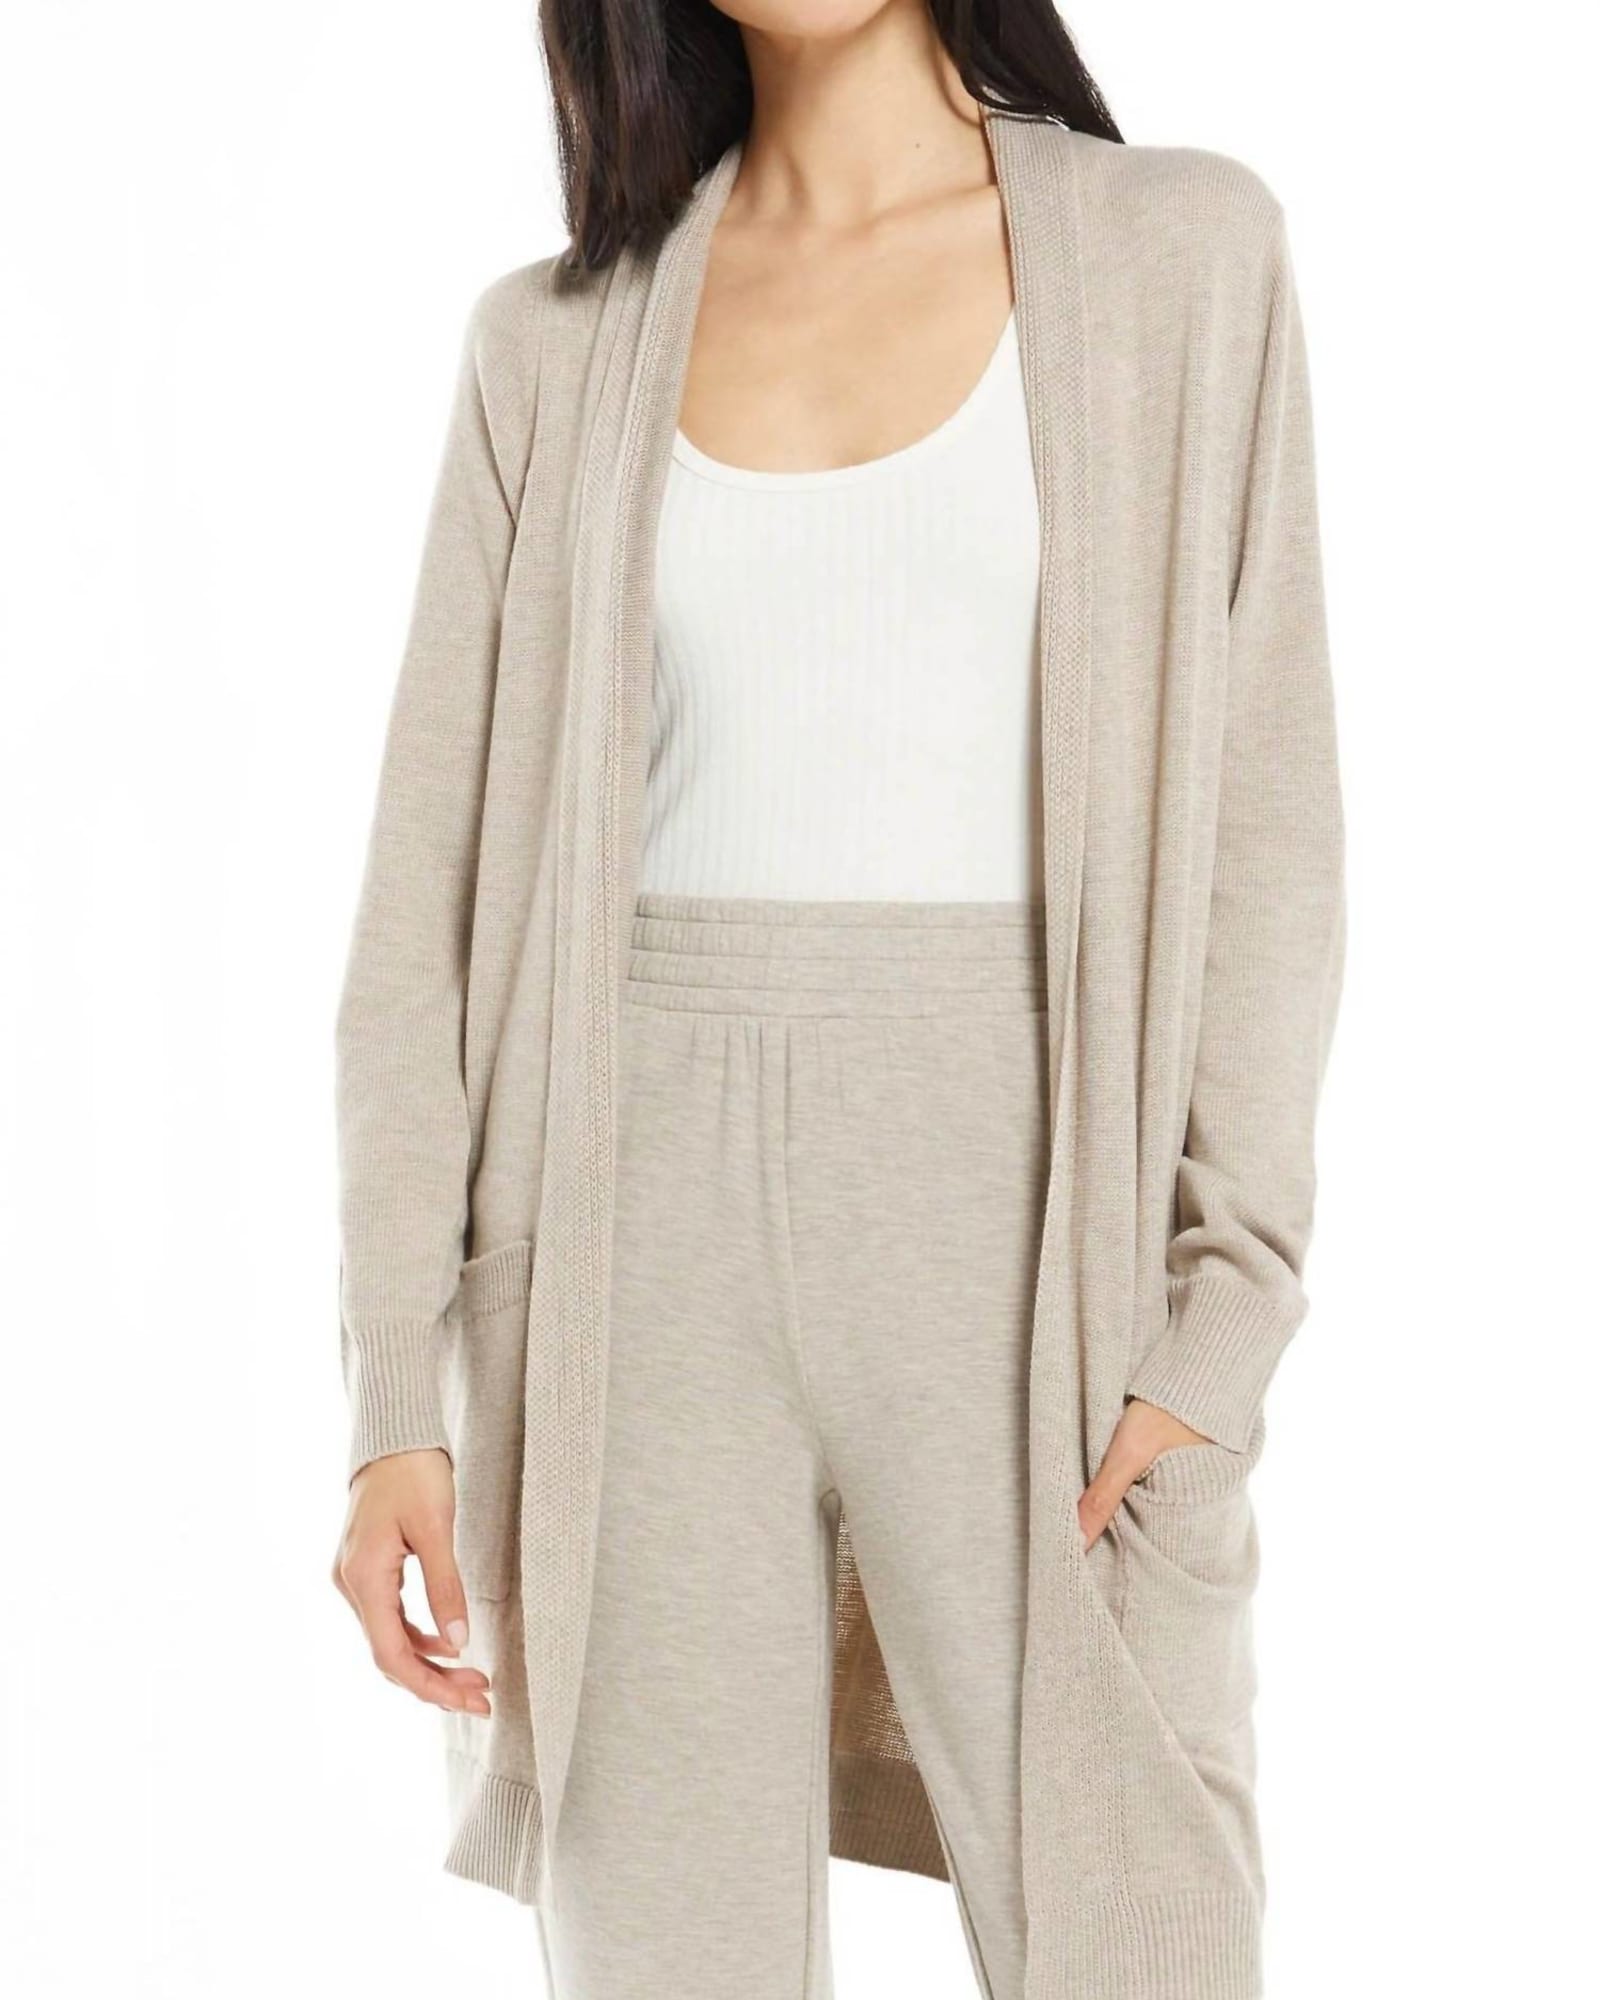 Relaxed Jersey Cardigan in Heather Latte | Heather Latte